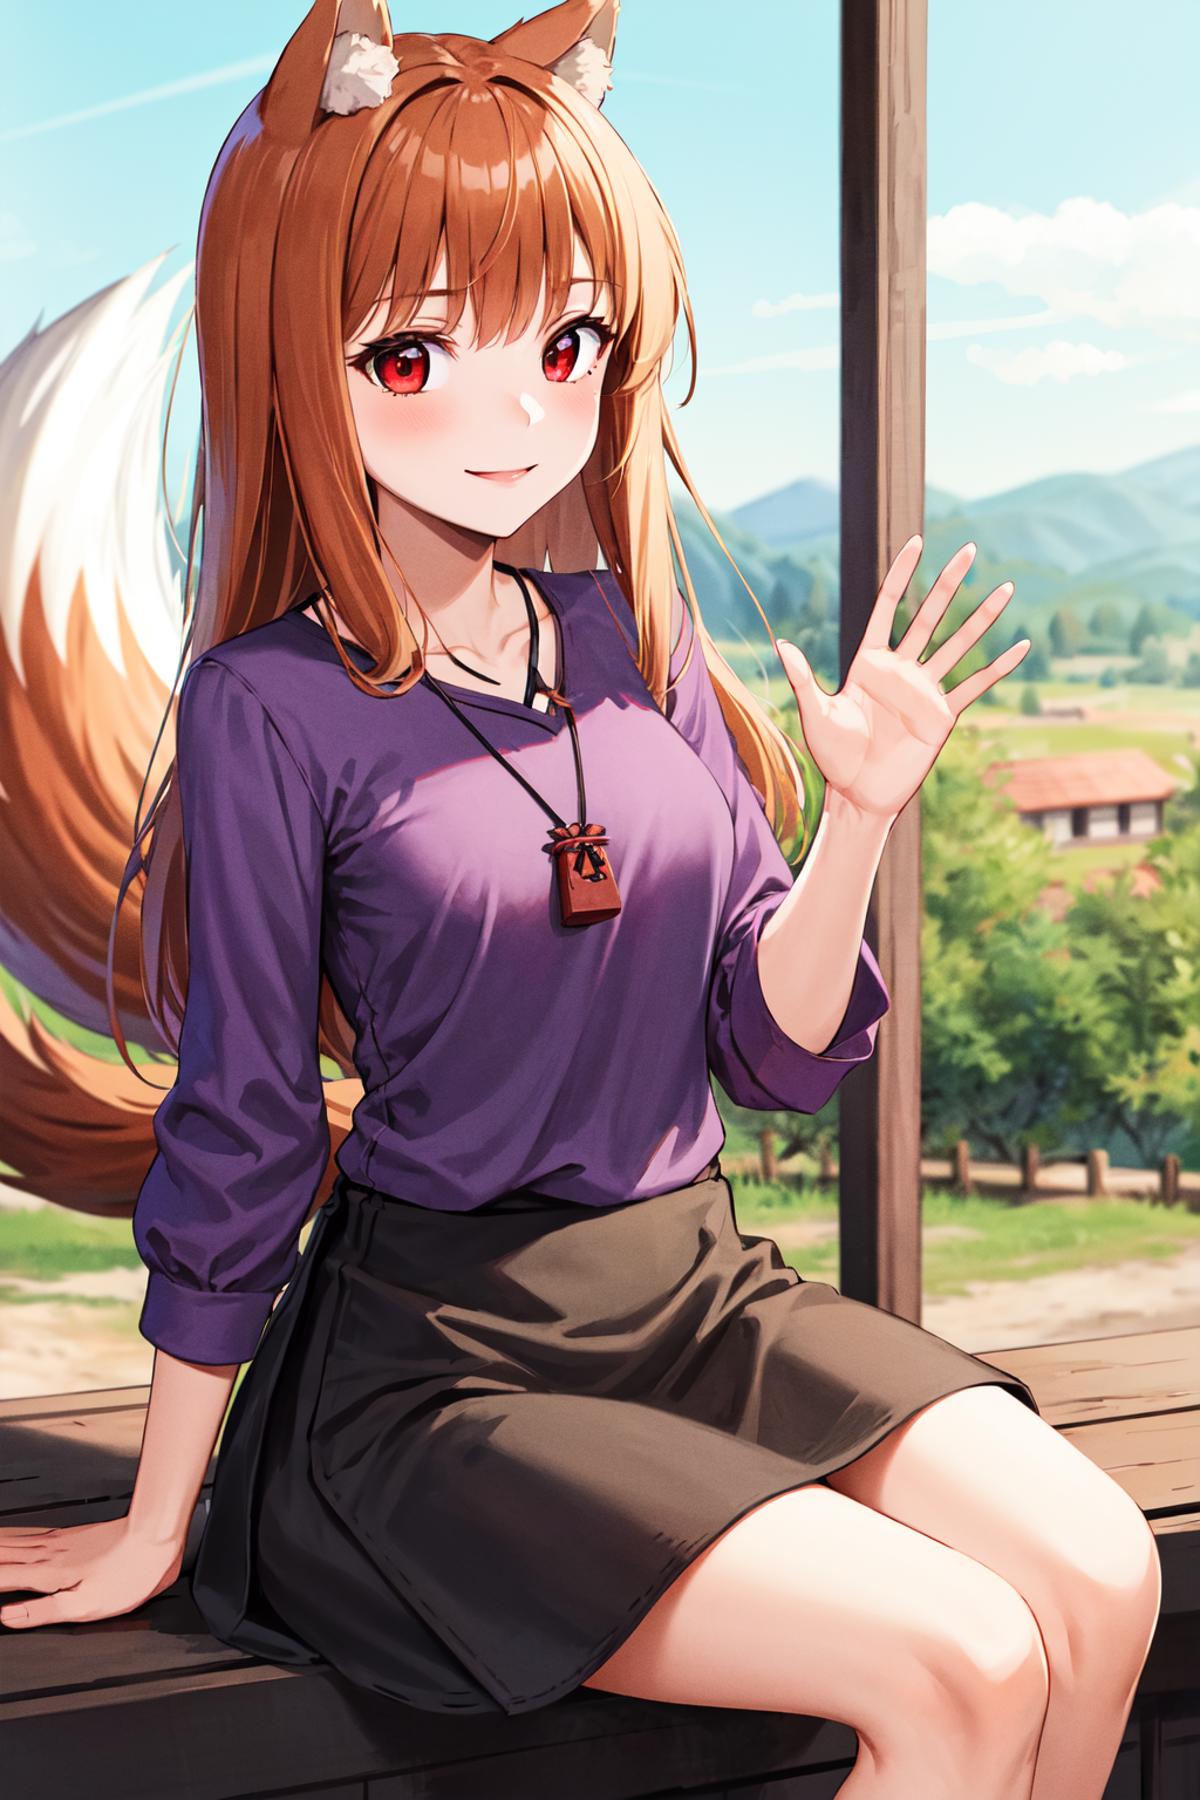 Anime girl with a fox tail and purple shirt waving her hand.